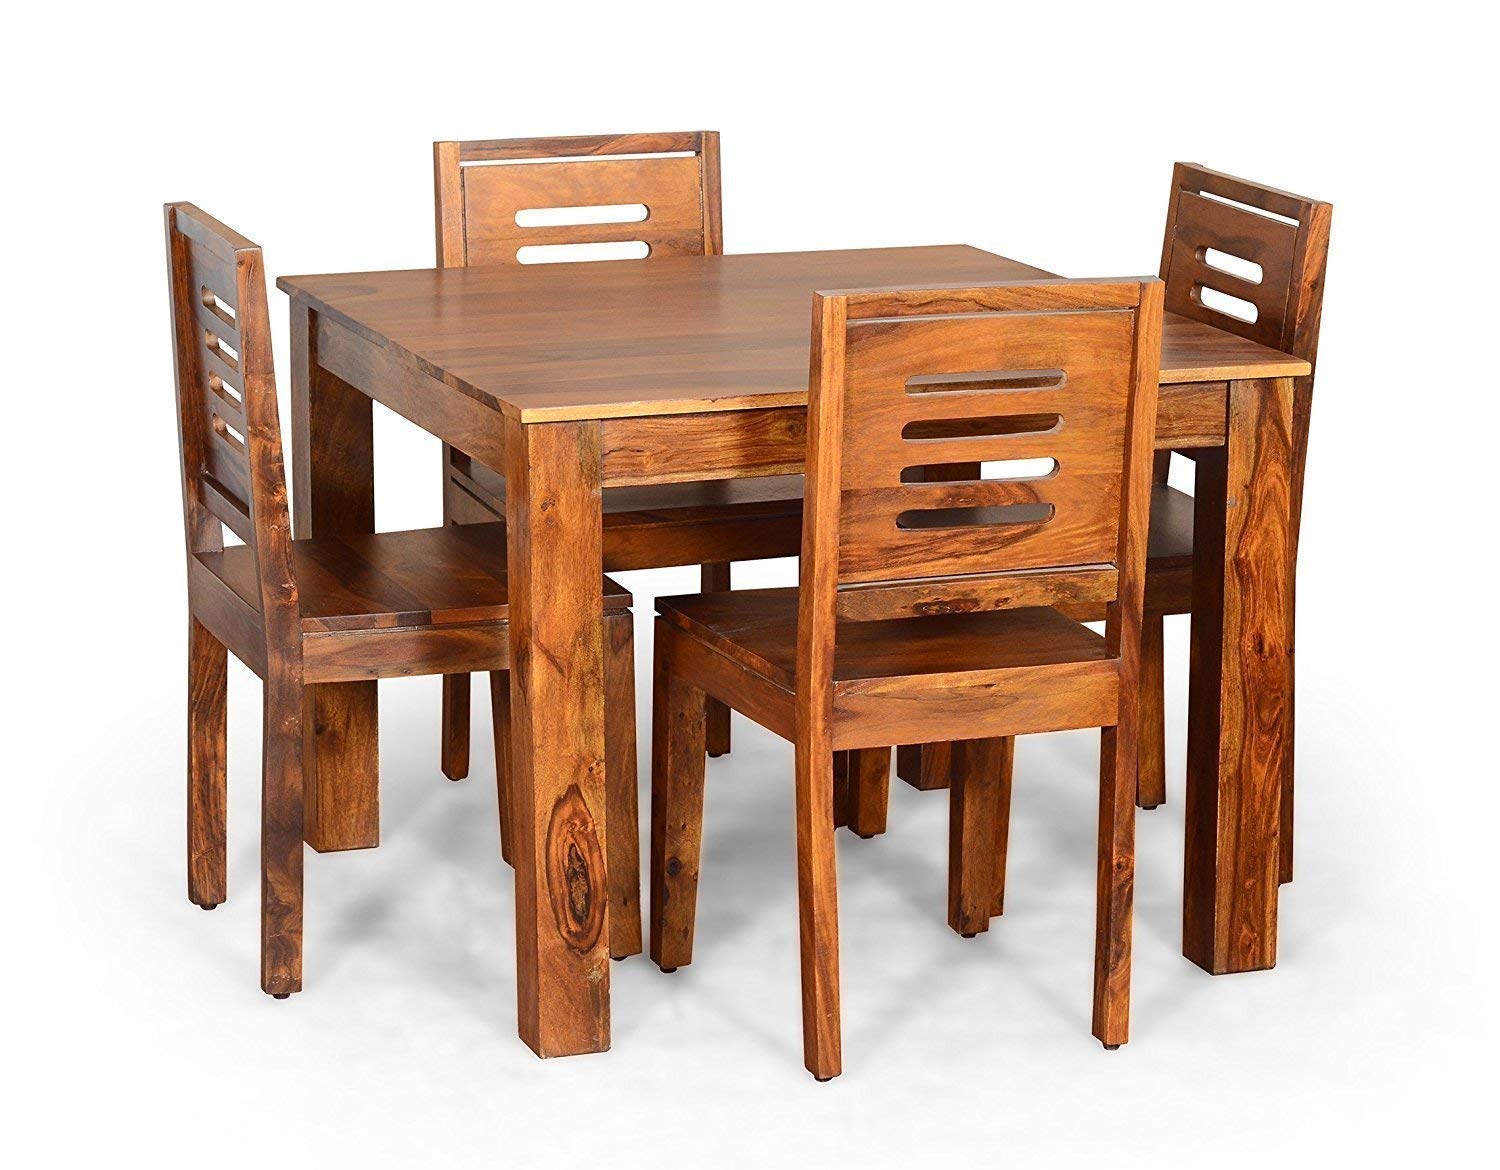 DriftingWood Sheesham Wood Dining Table Set With 4 Chairs For Living R Driftingwood